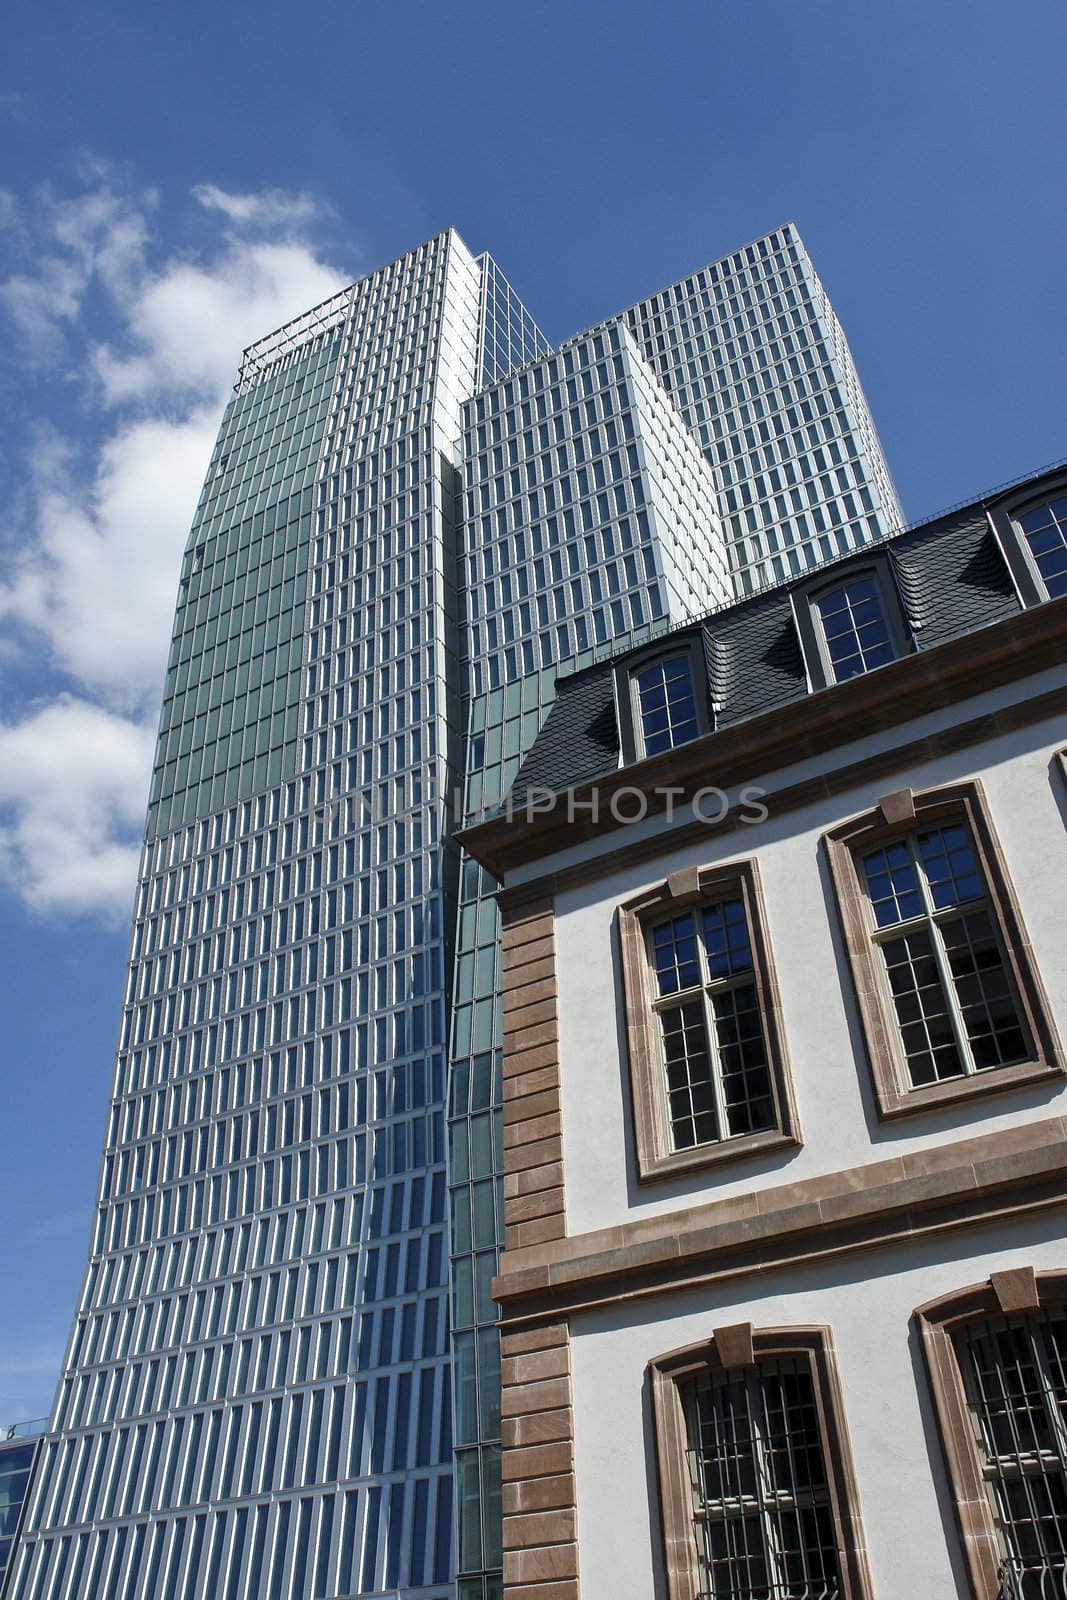 Street view of the rebuild Thurn und Taxis Palais in front of a modern office tower in downtown Frankfurt.